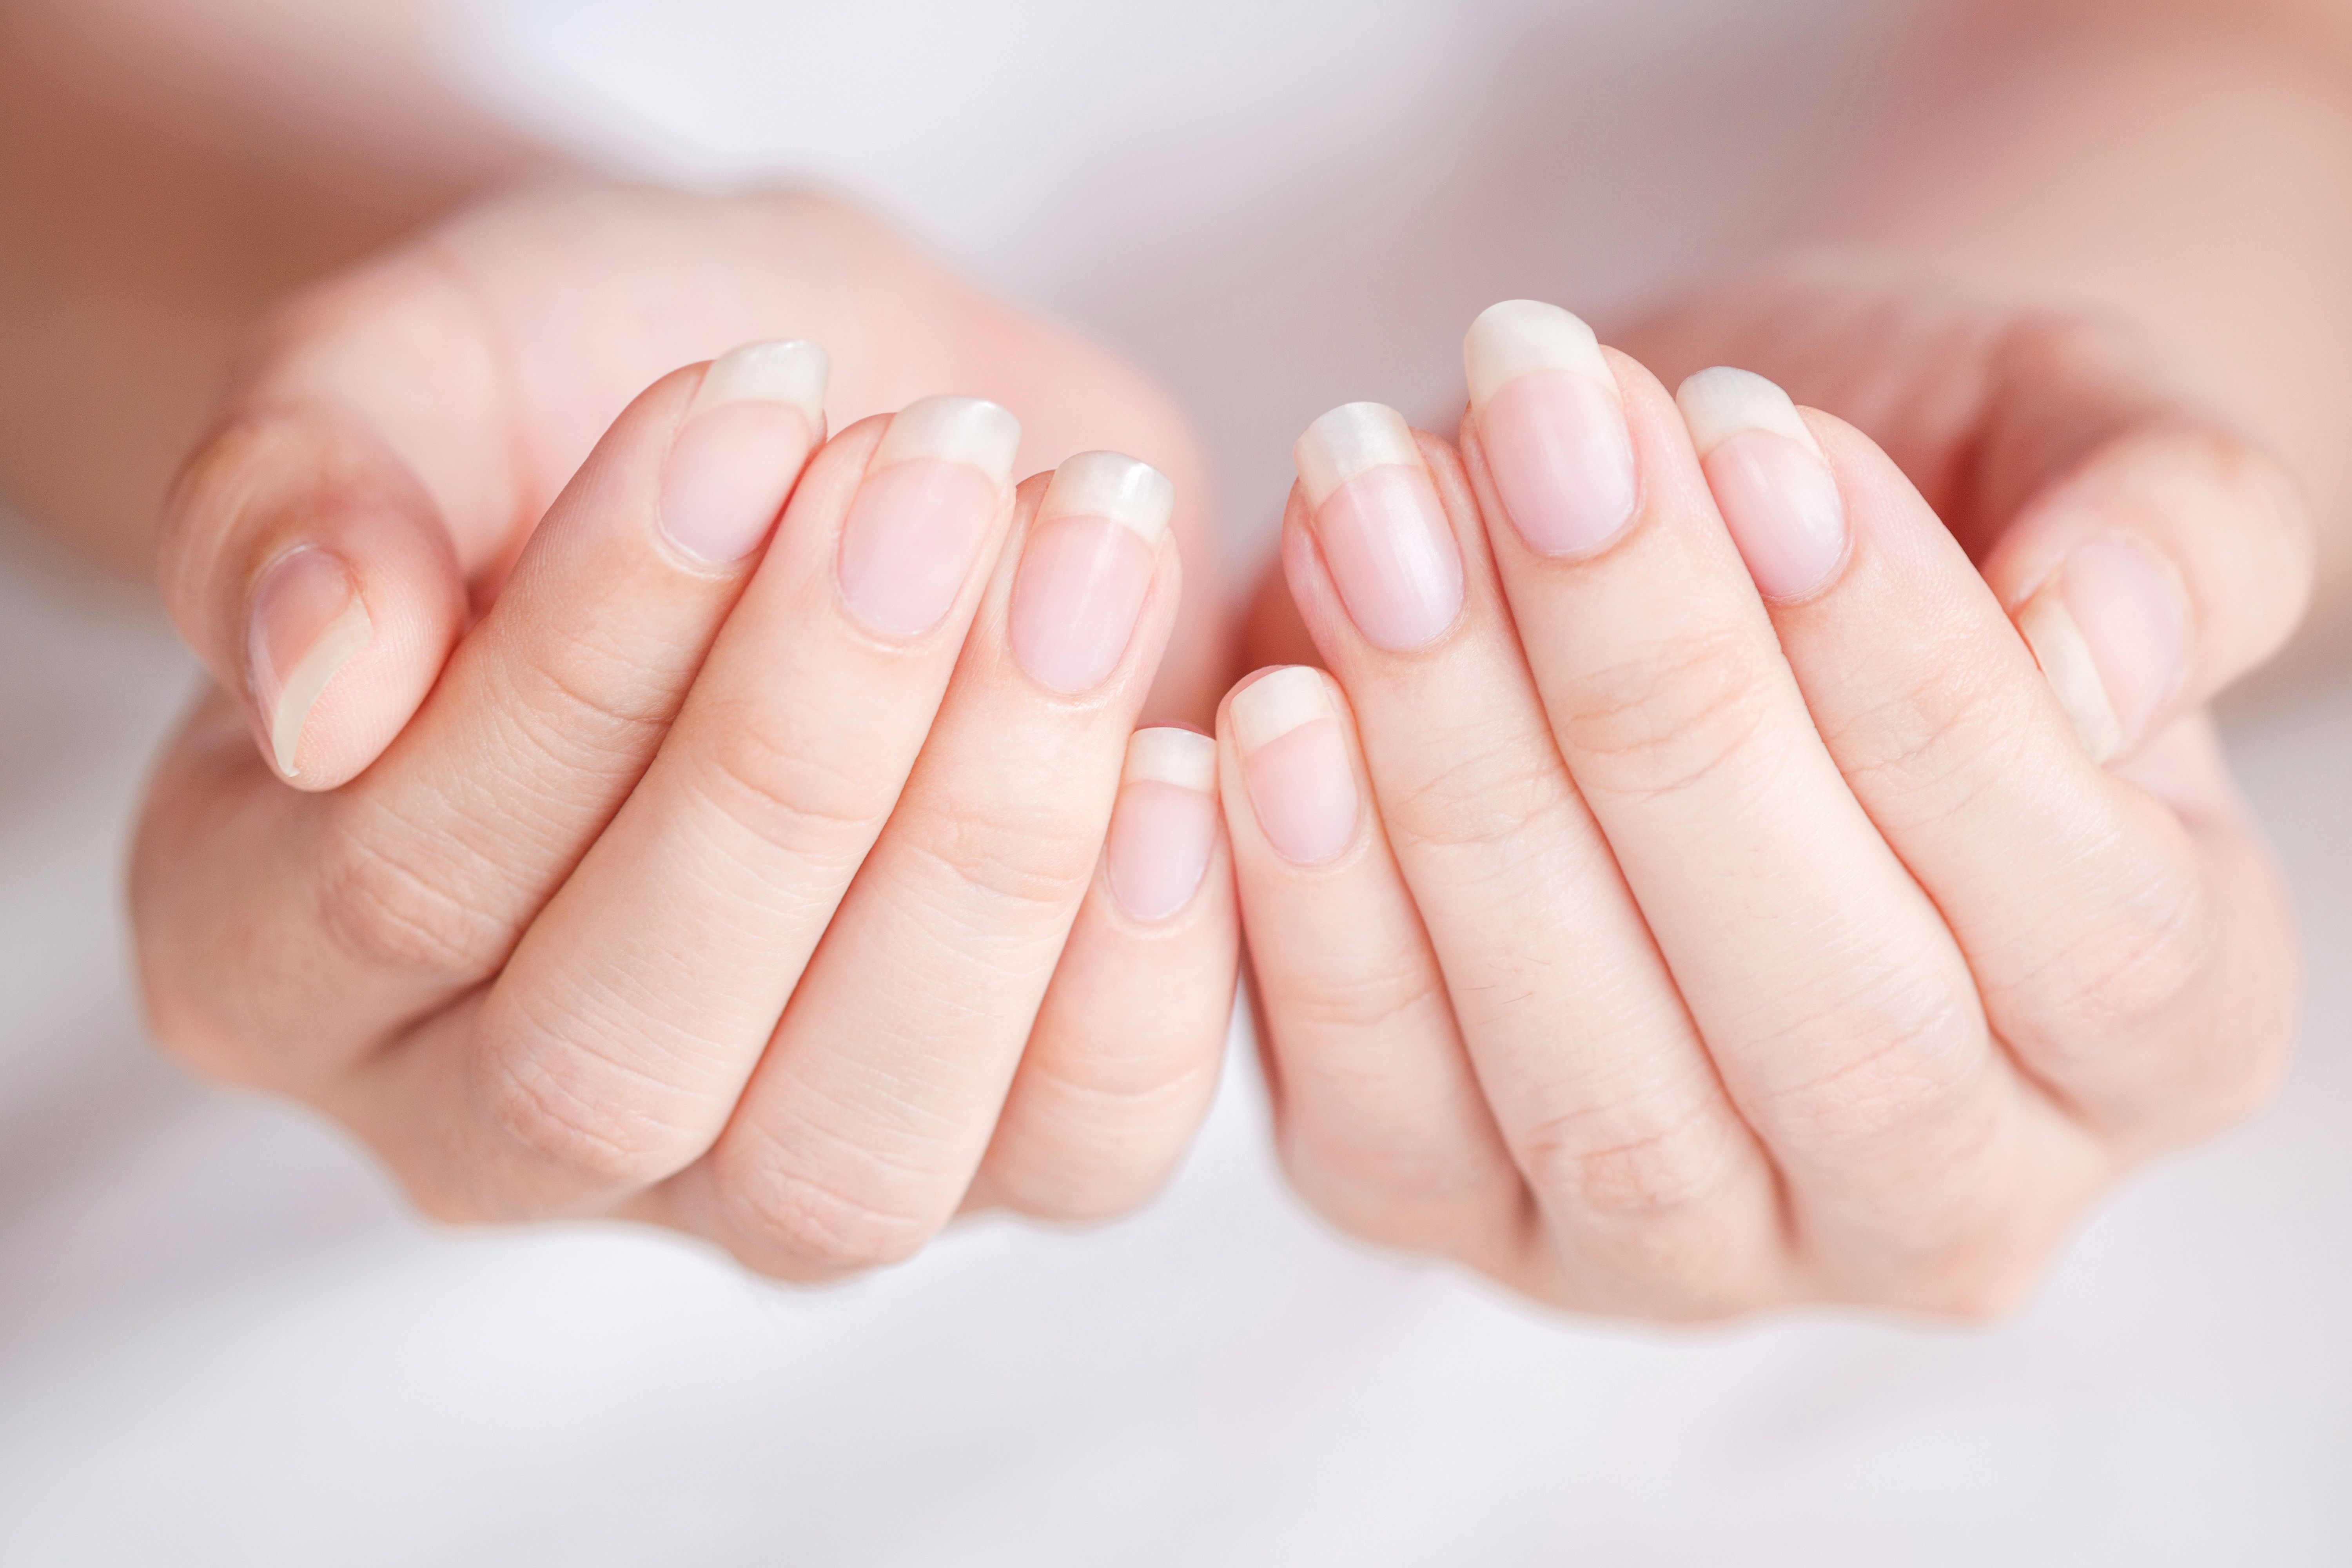 How to Stop Picking Cuticles in 2022 According to Doctors